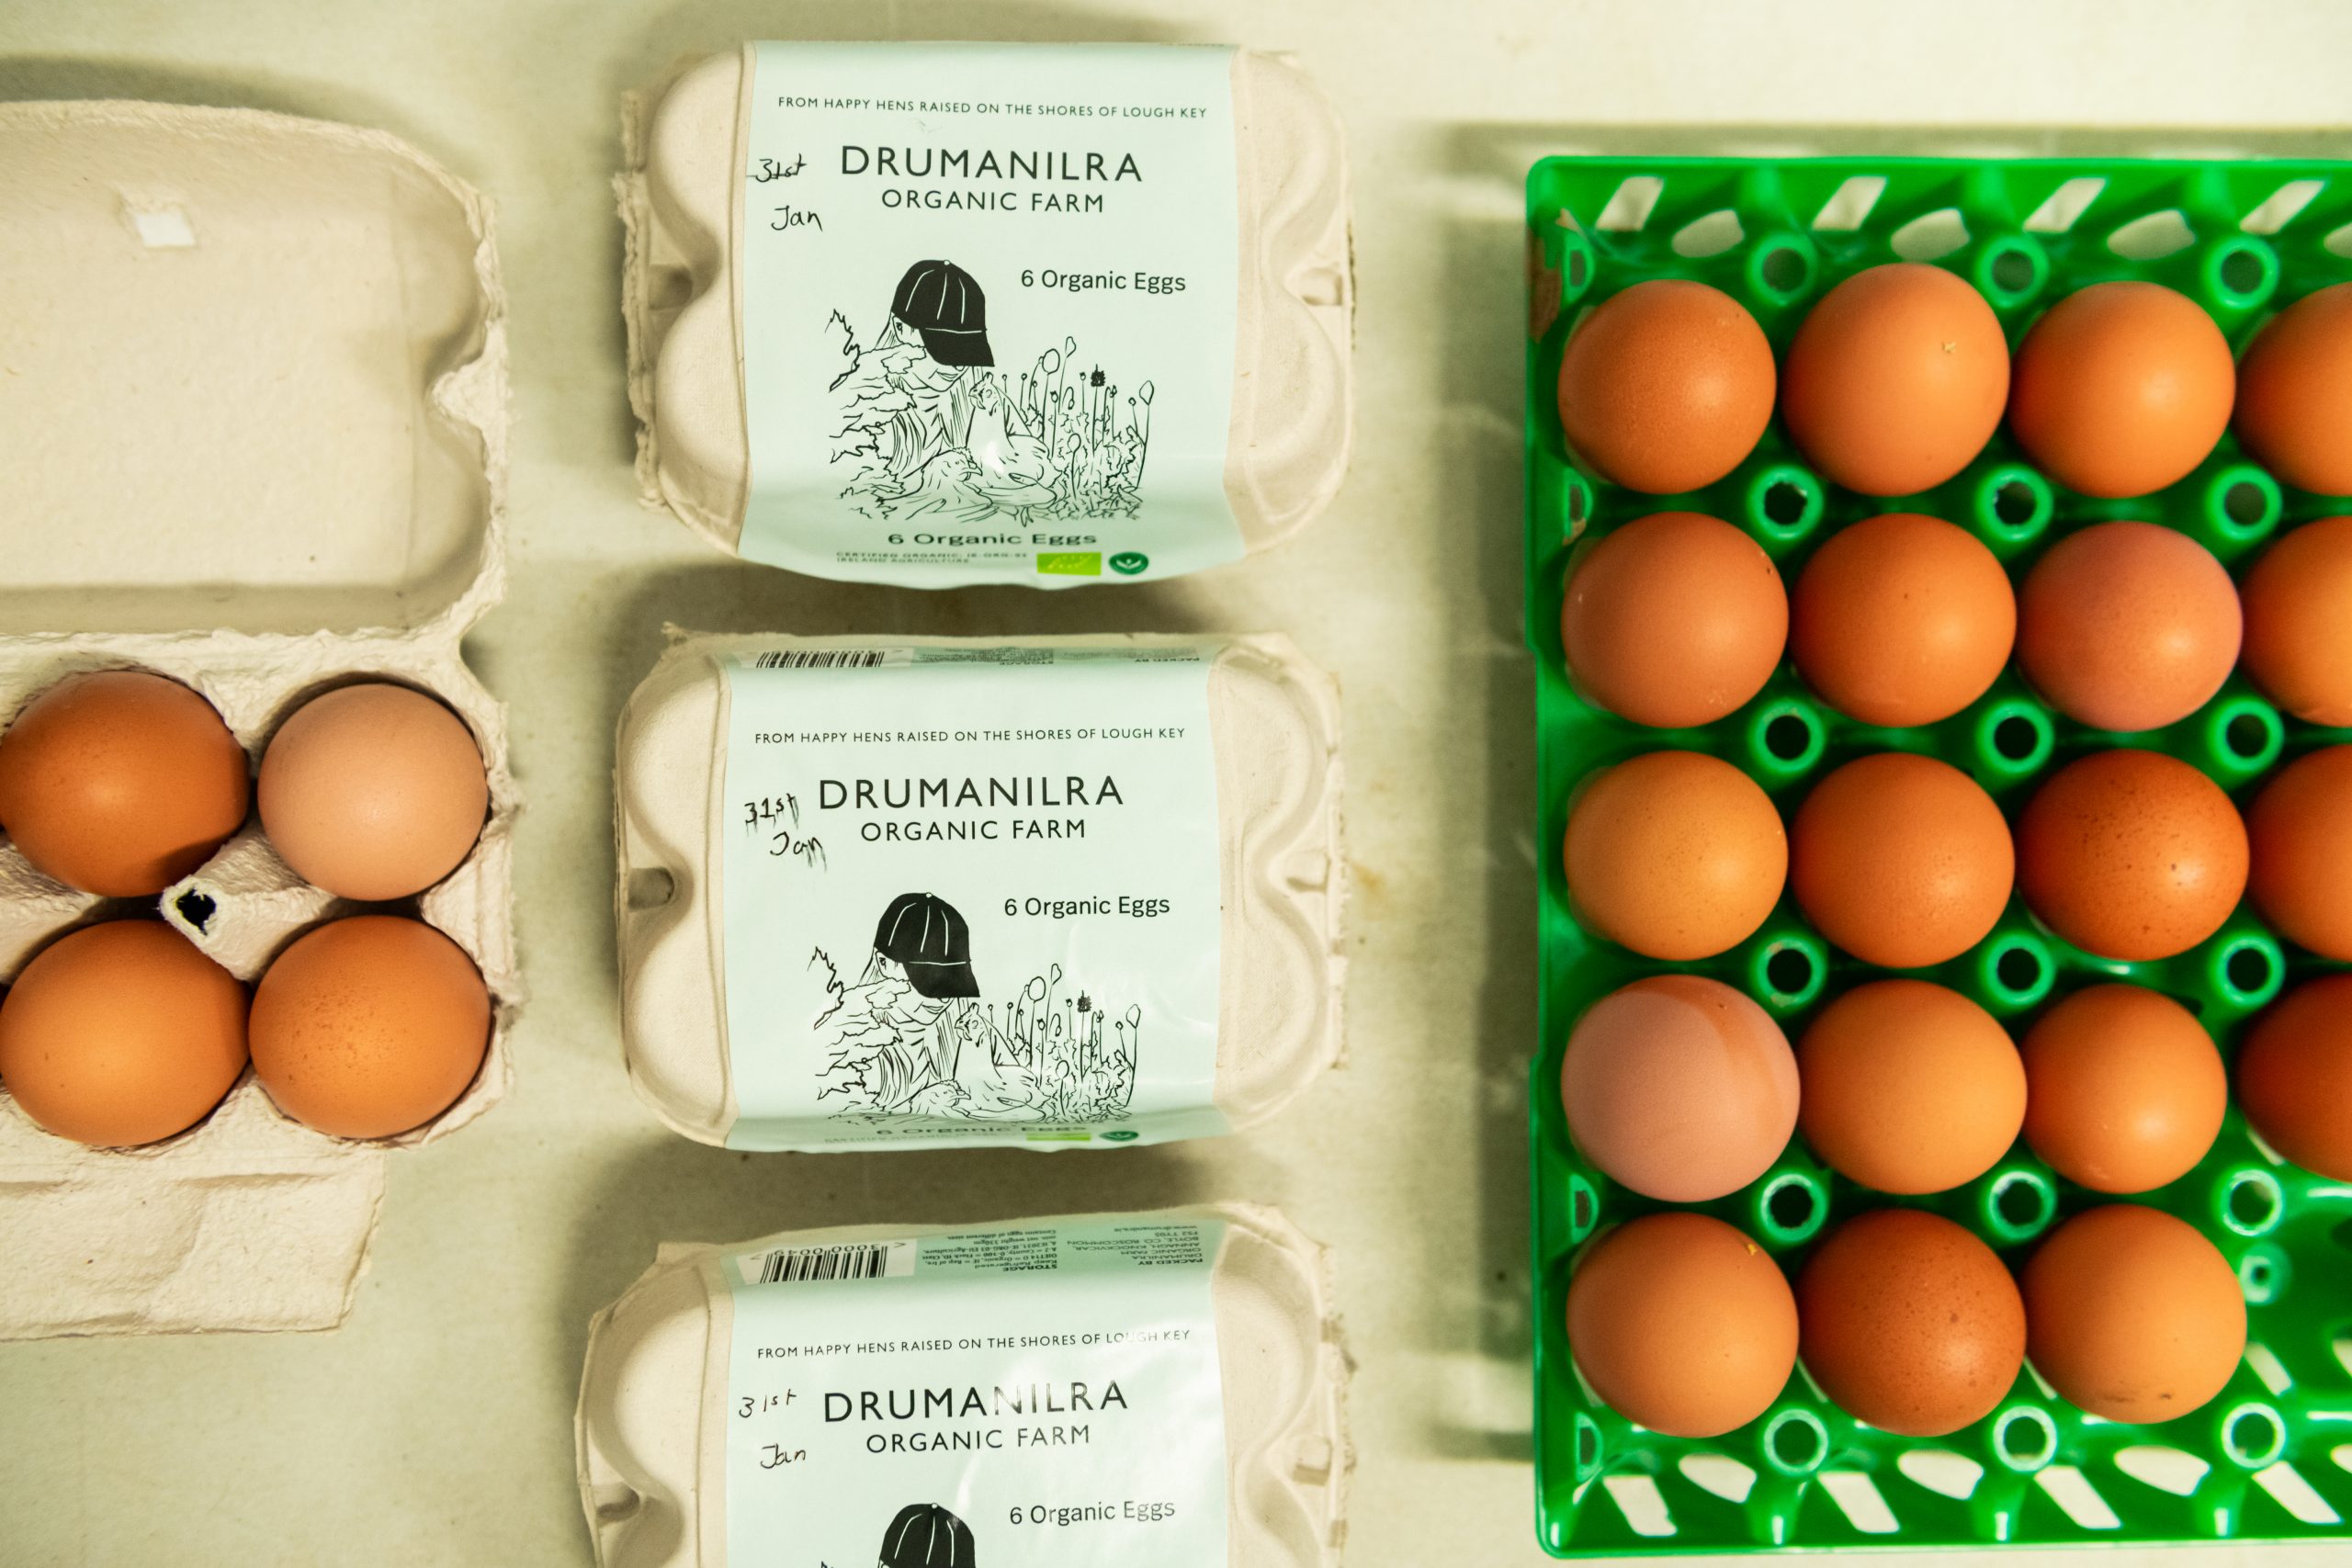 Organic Eggs vs Regular Eggs – what’s the difference?